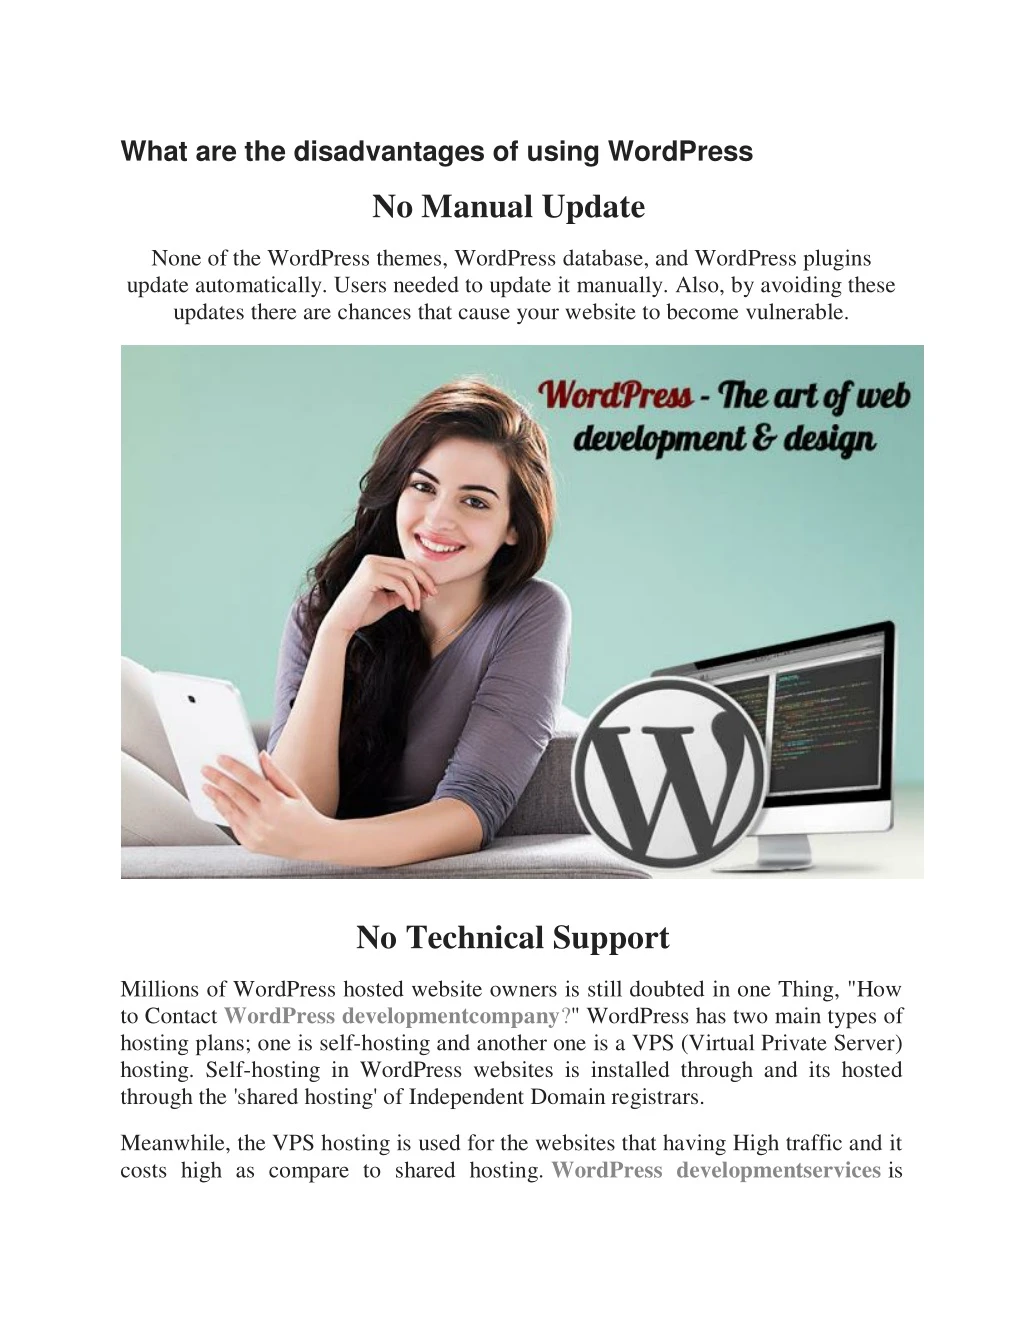 what are the disadvantages of using wordpress